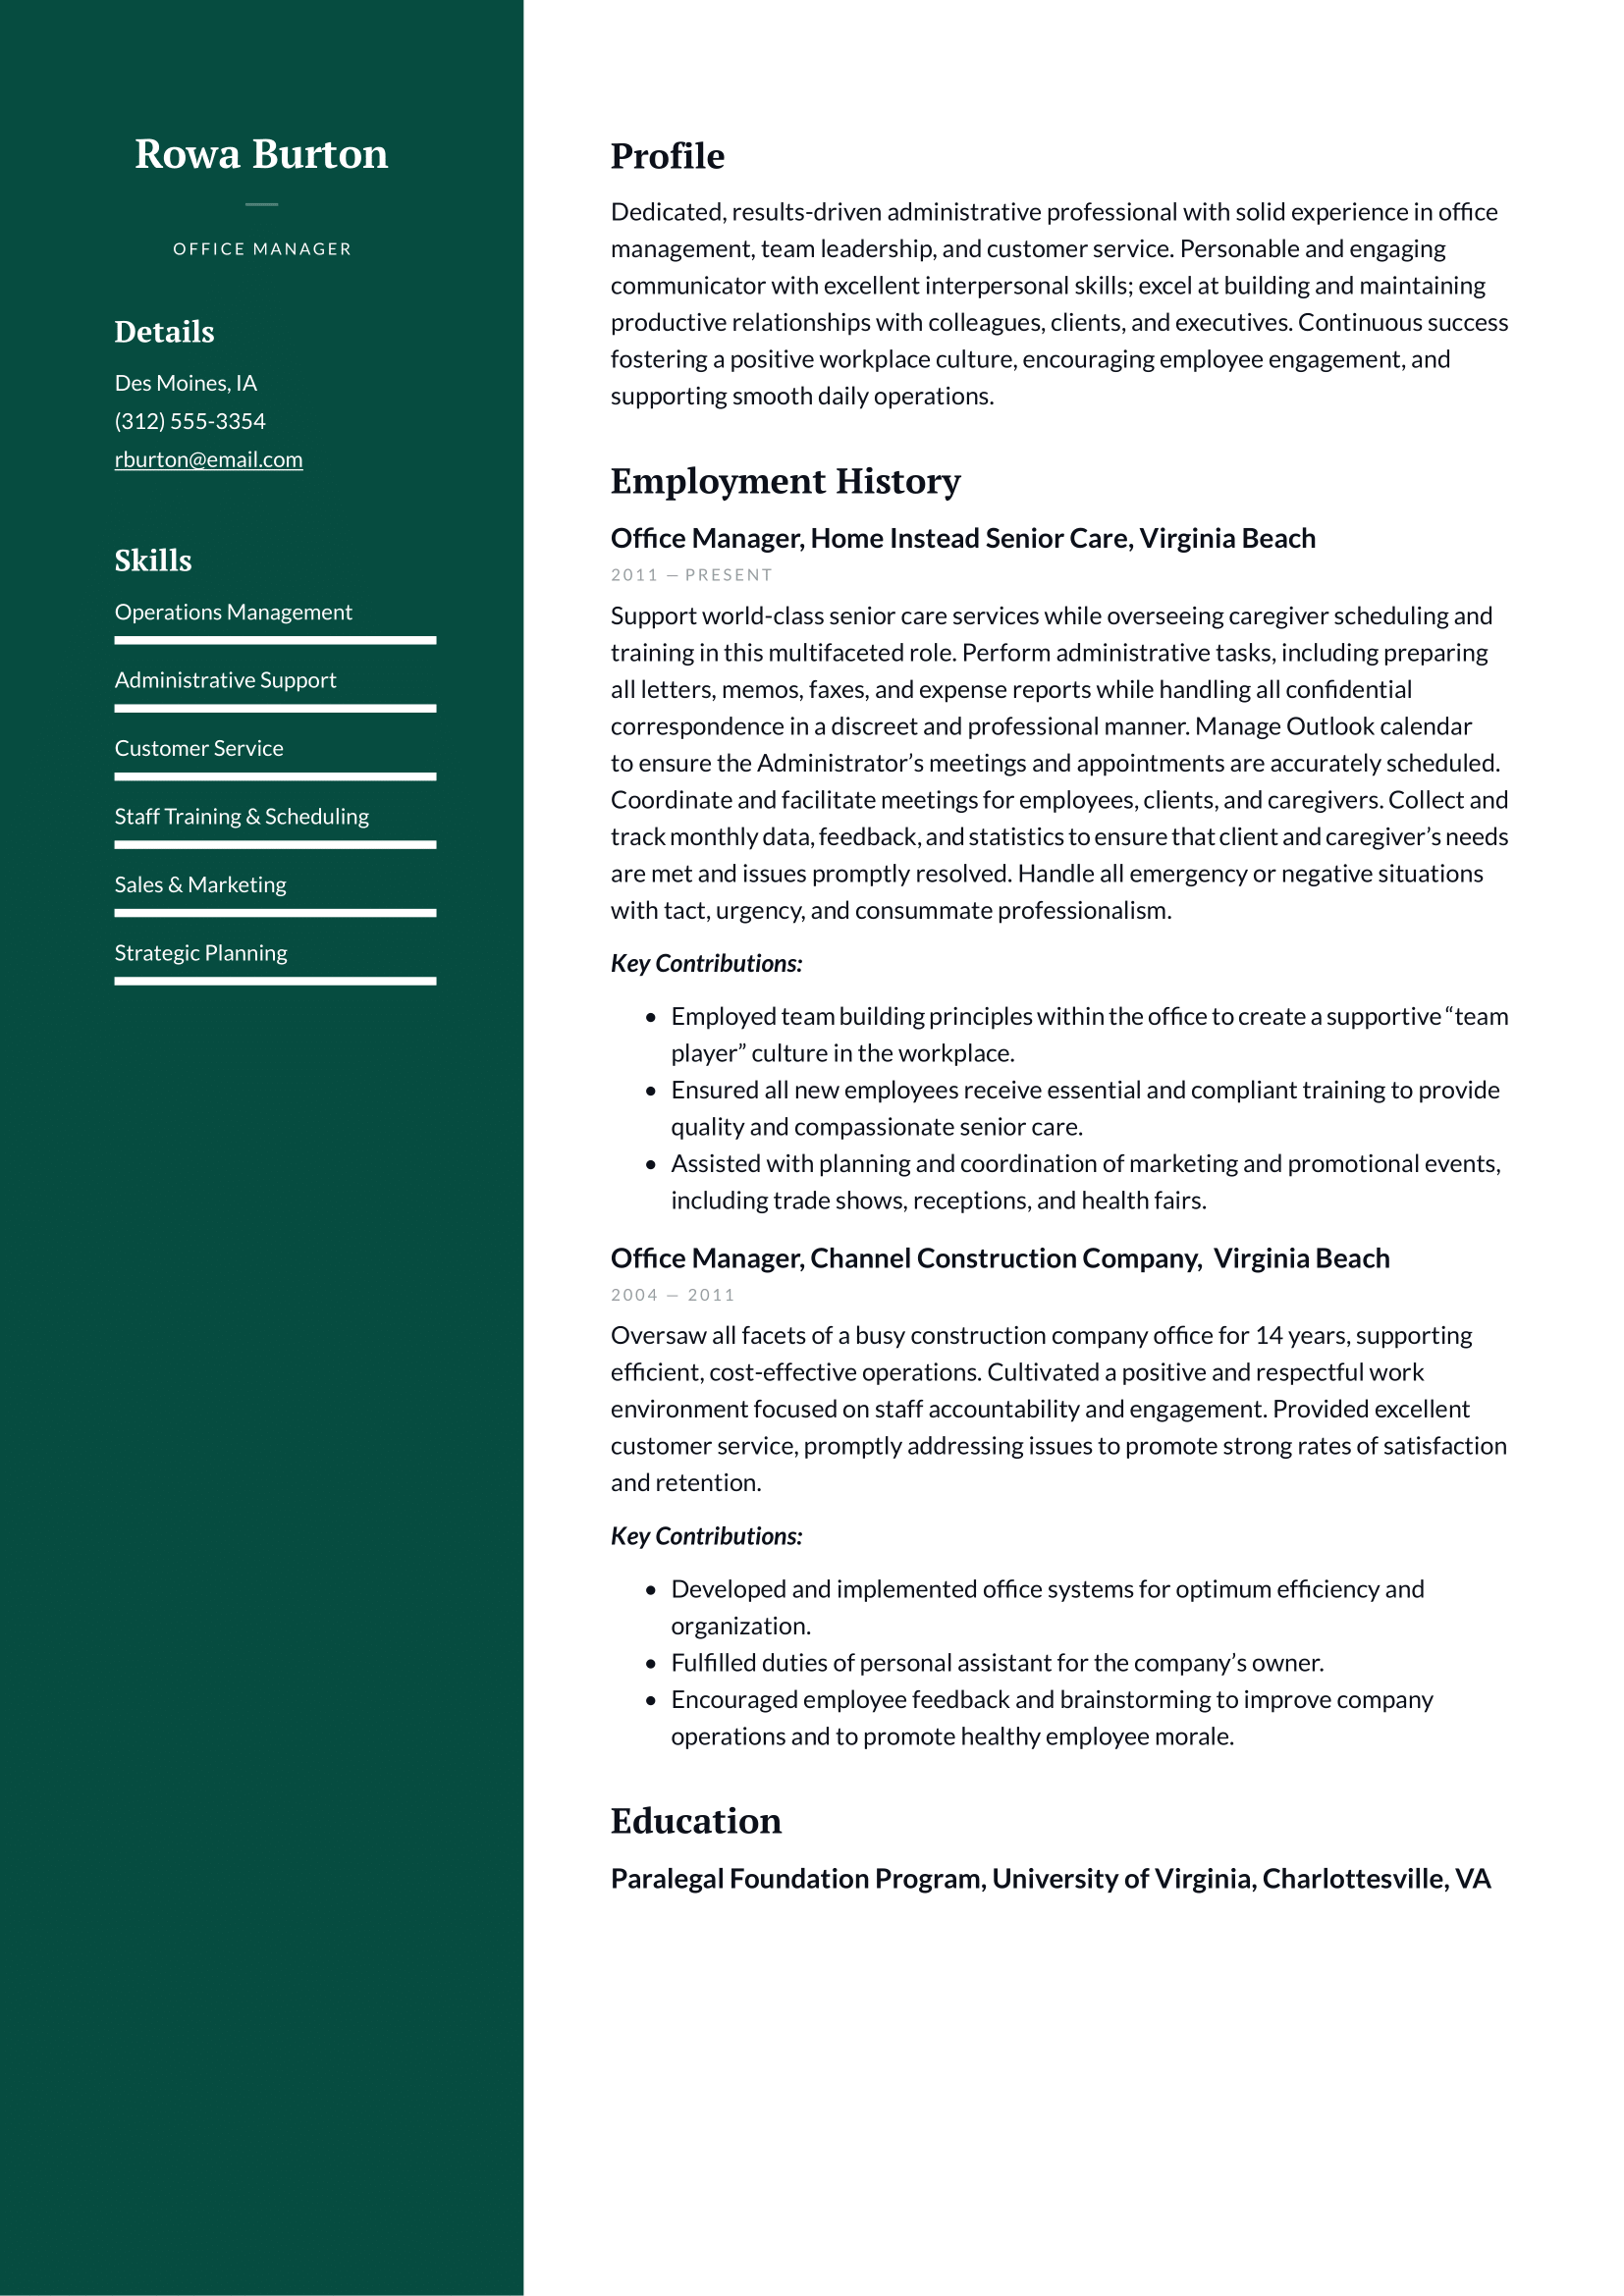 Office Manager Resume Example & Writing Guide